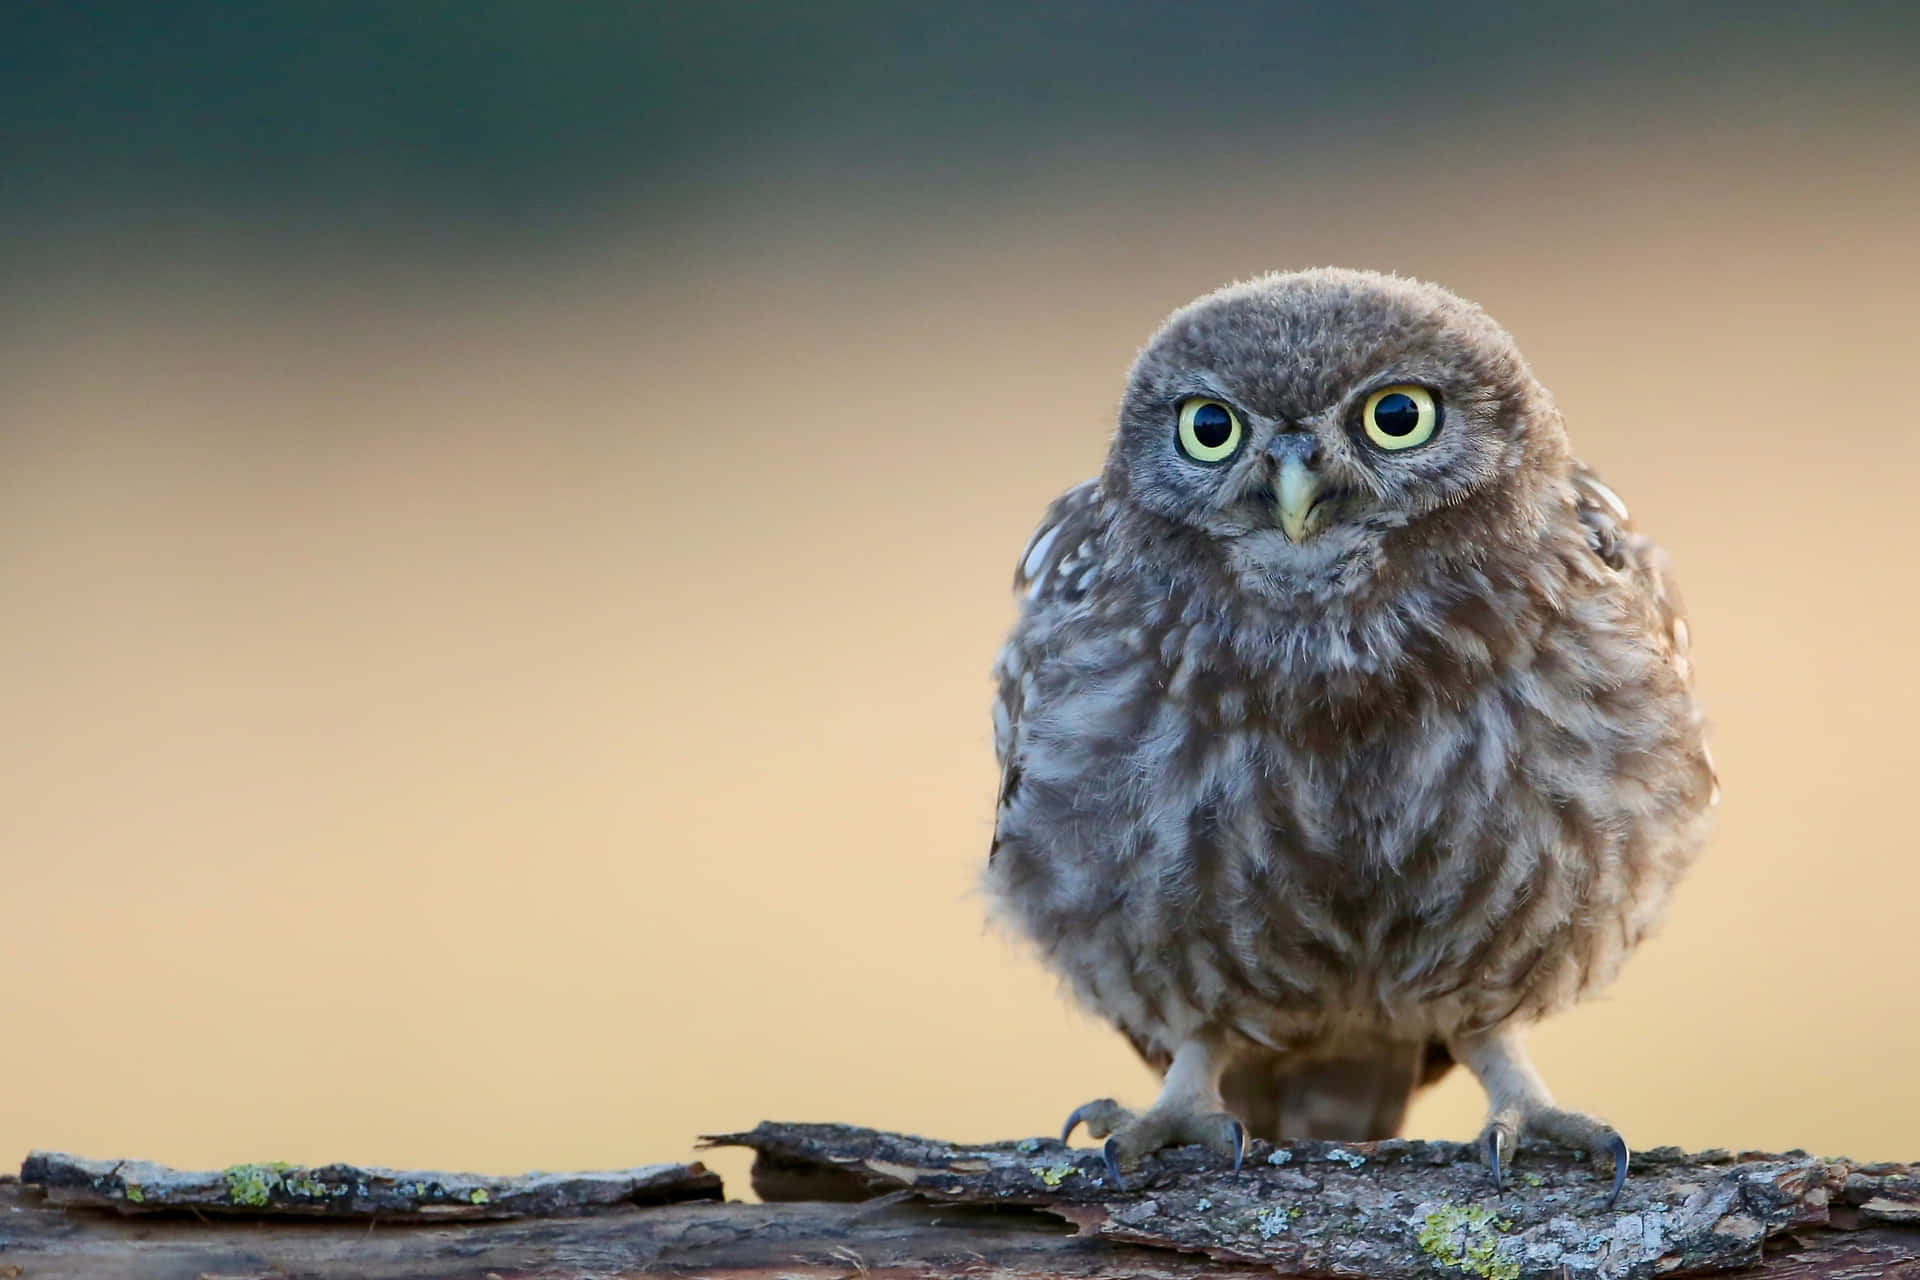 "This Cute Owl Is Ready to Take Flight!"